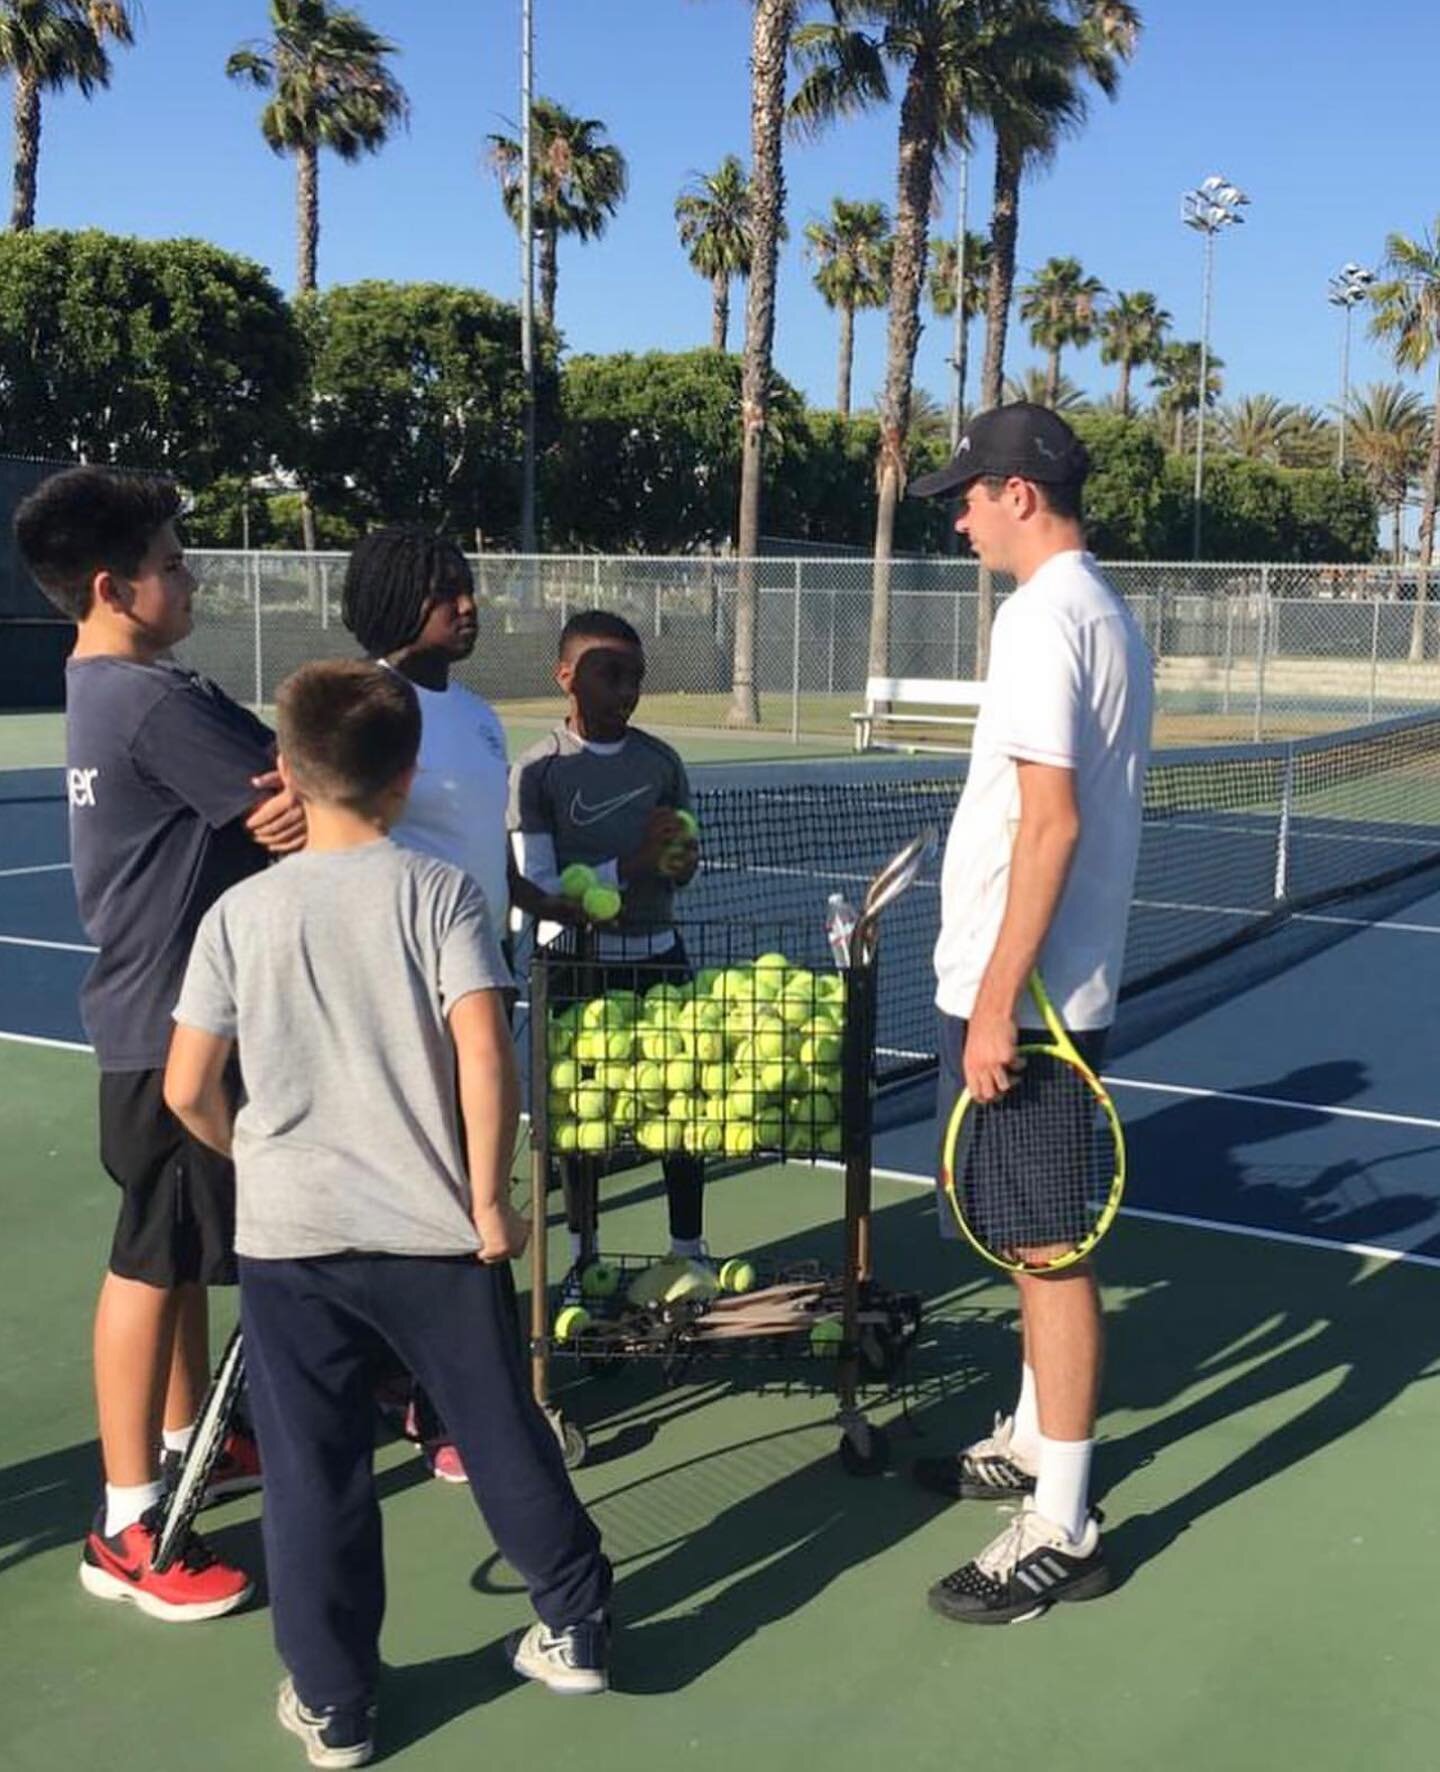 Shoutout to Coach Michael 👏 Our players were so fortunate to grow and develop their skills on court with you! 🎾 Your dedication, knowledge of the game and passion for coaching has helped shape the future of so many young players. 

Congratulations 